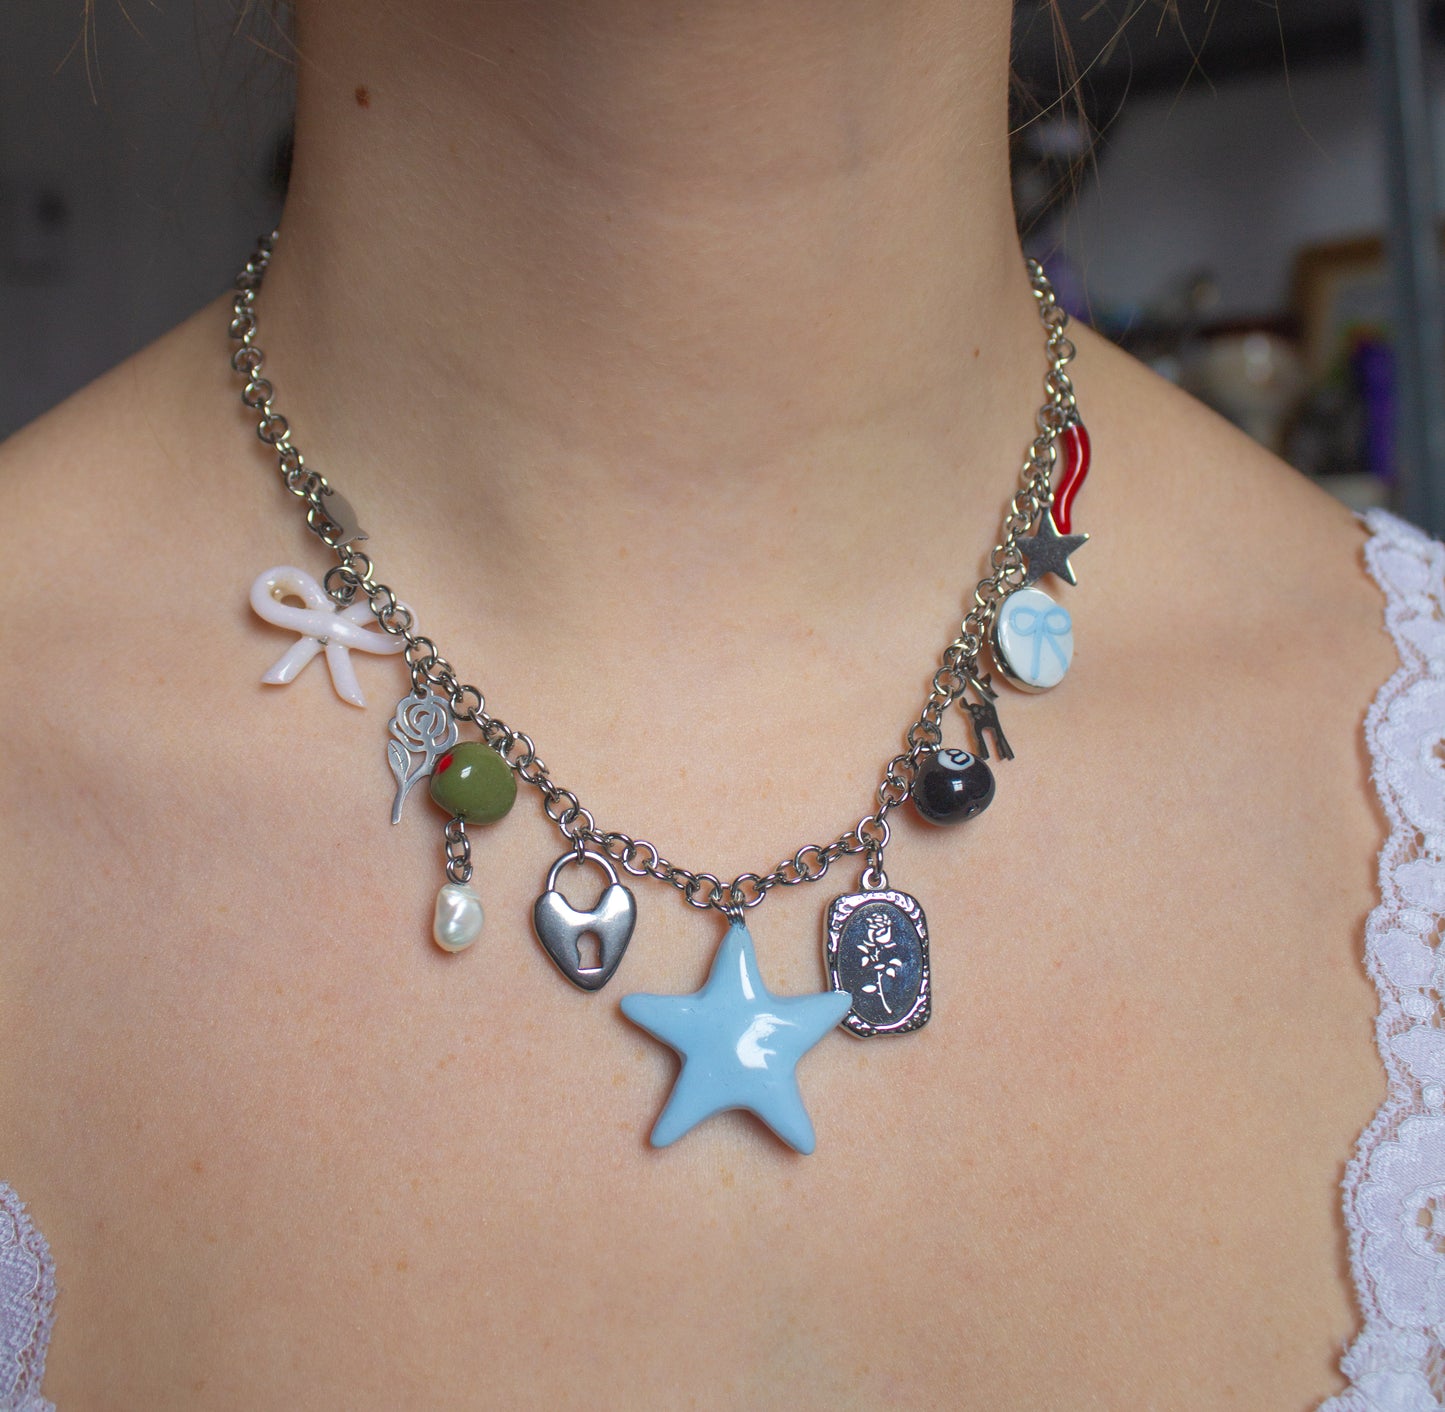 Blue star charm necklace